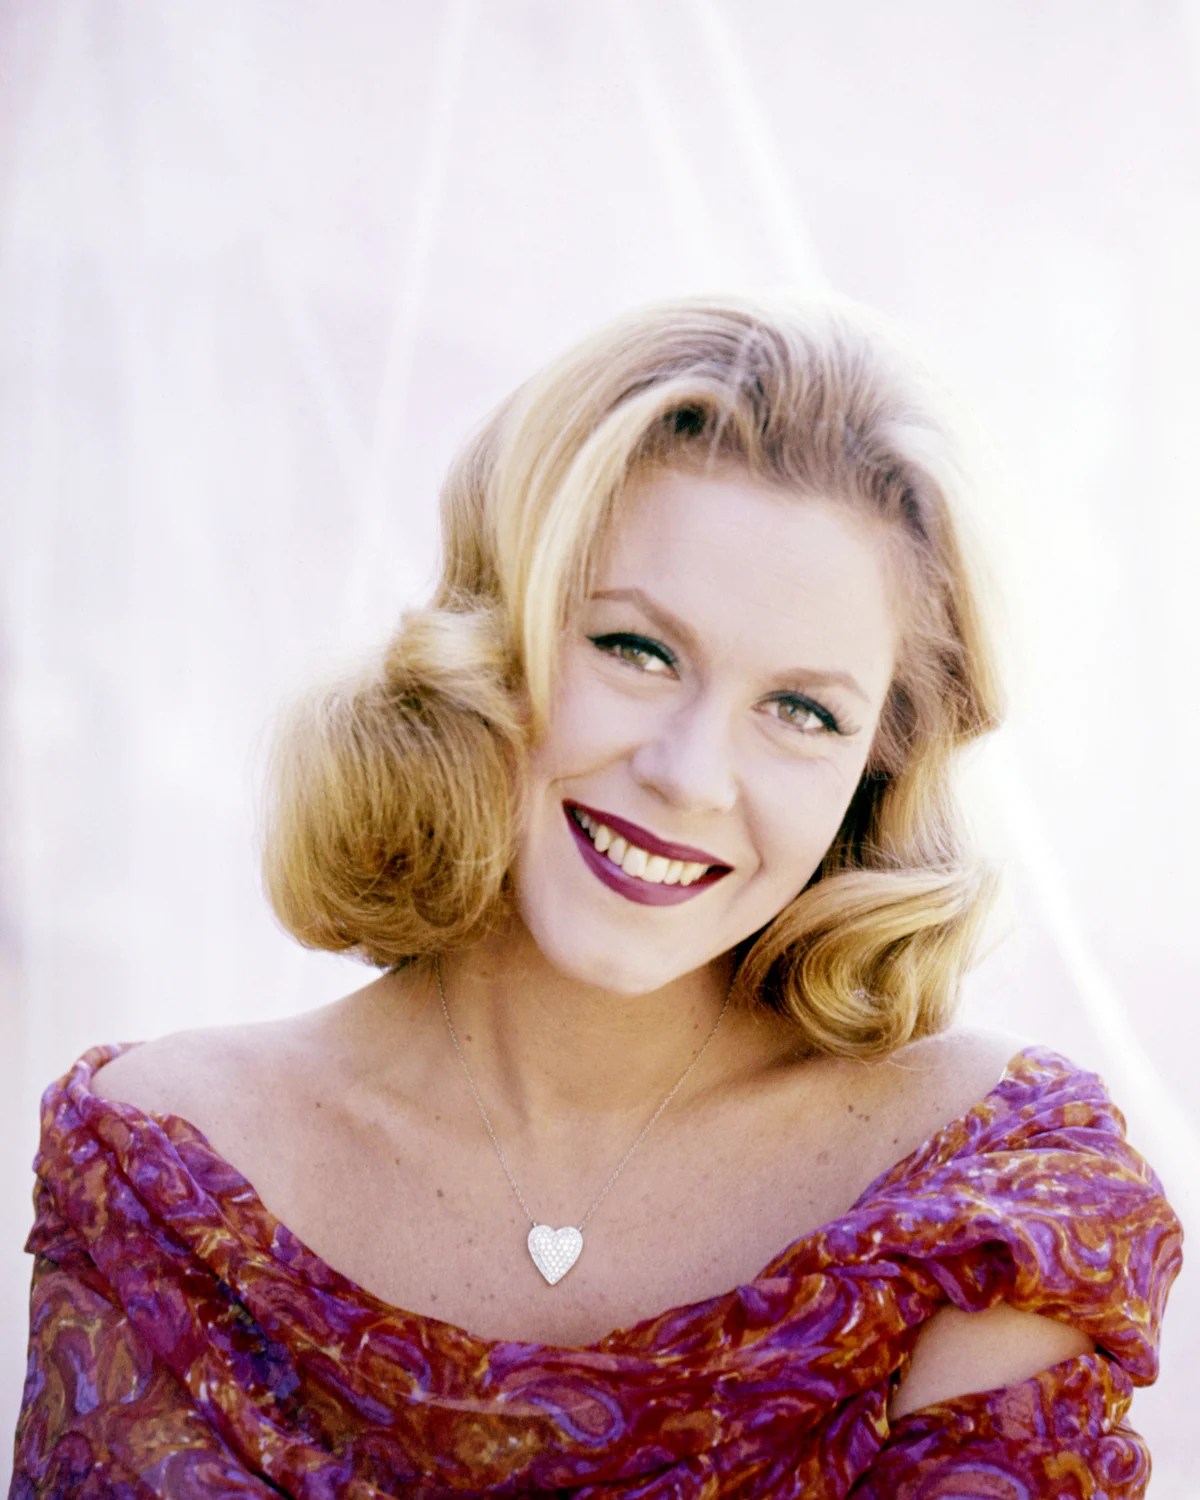 Remembering Beloved 'Bewitched' Star Elizabeth Montgomery Who Died from